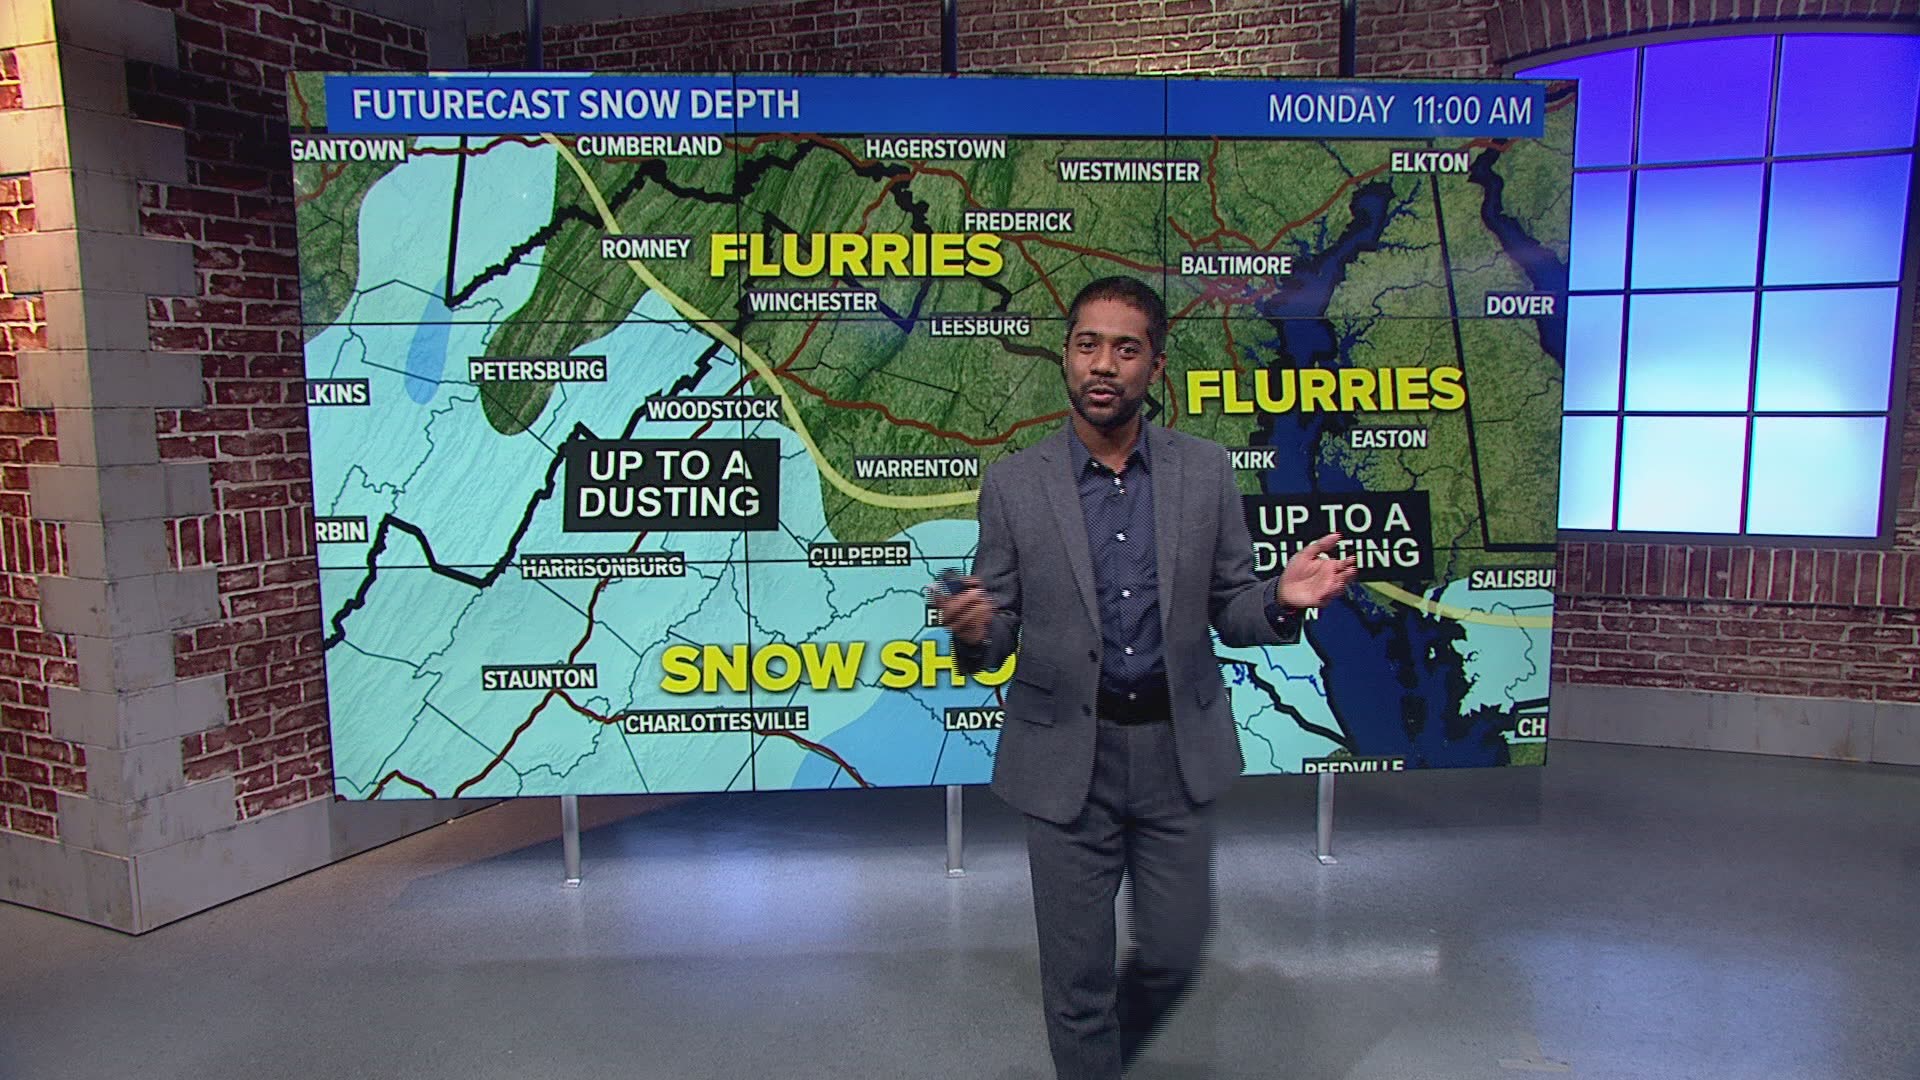 Flurries and snow showers are likely Monday morning